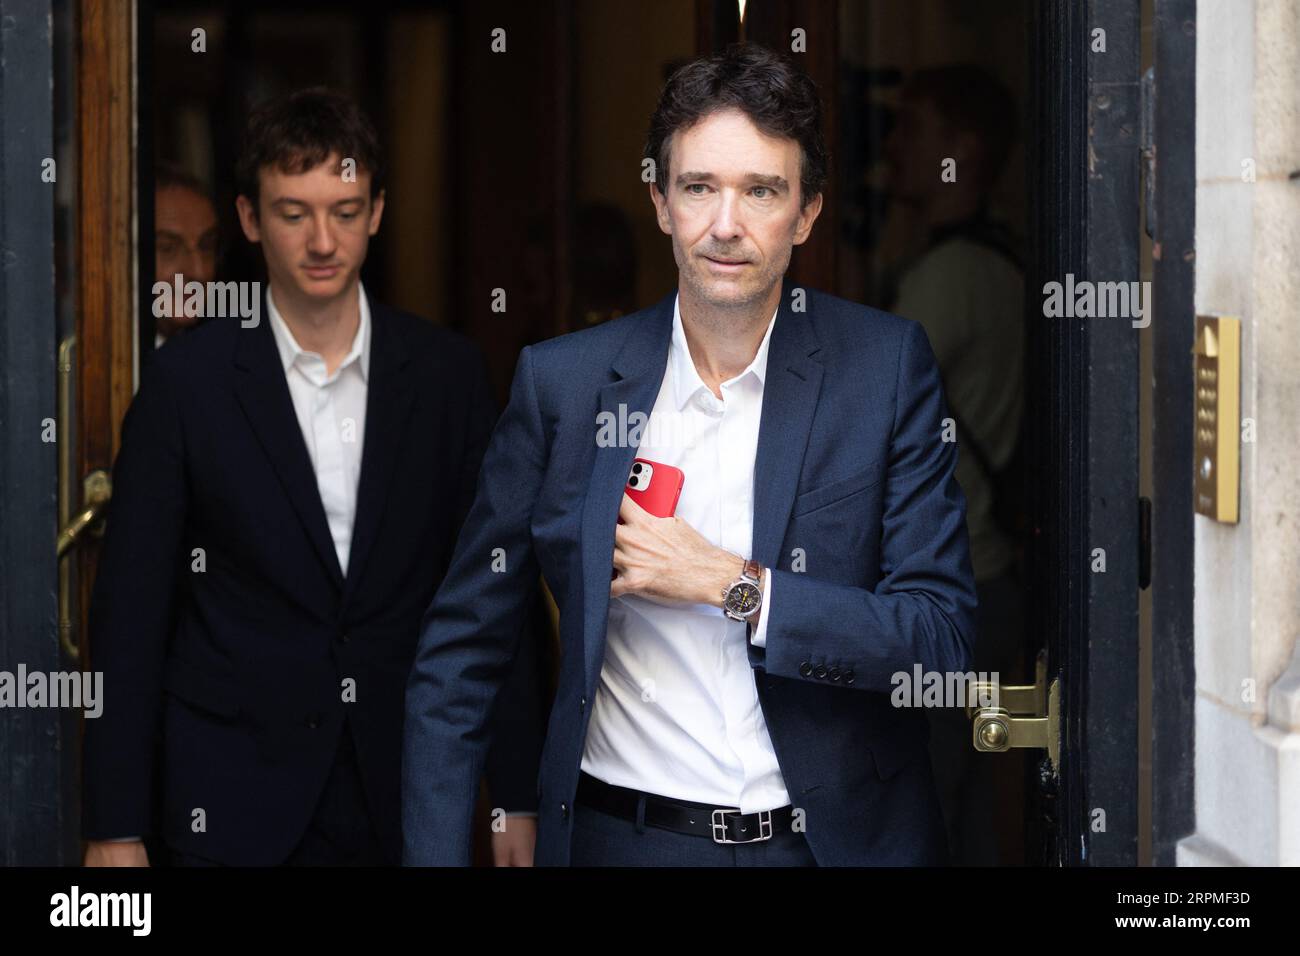 Antoine Arnault Becomes CEO of LVMH Holding Company